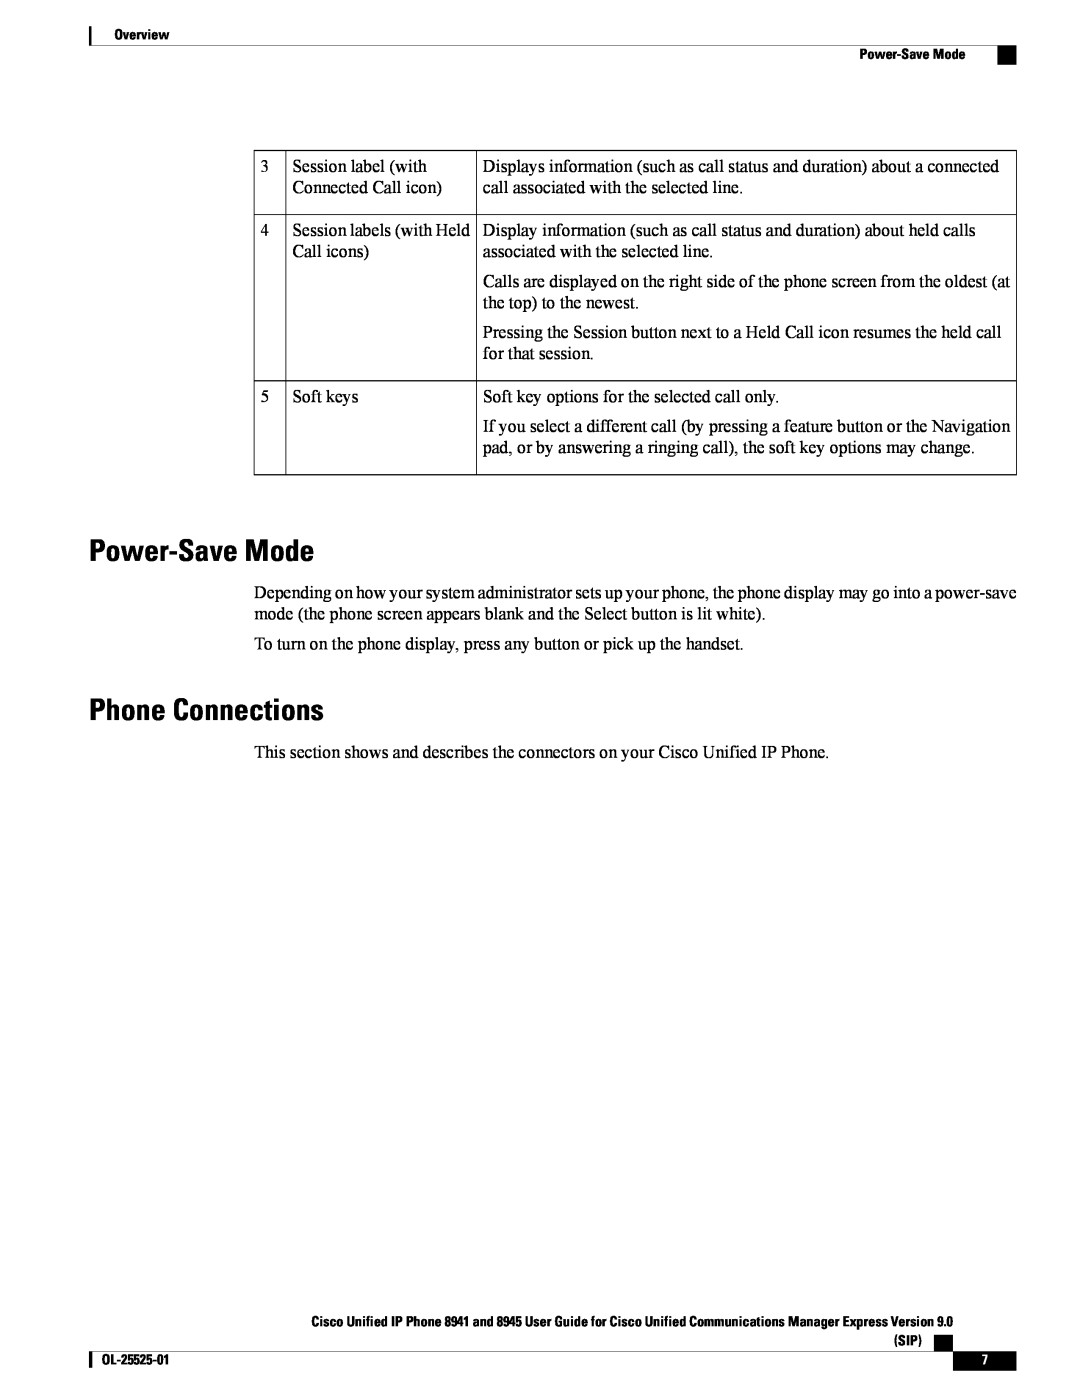 Cisco Systems 8945, 8941 manual Power-Save Mode, Phone Connections 